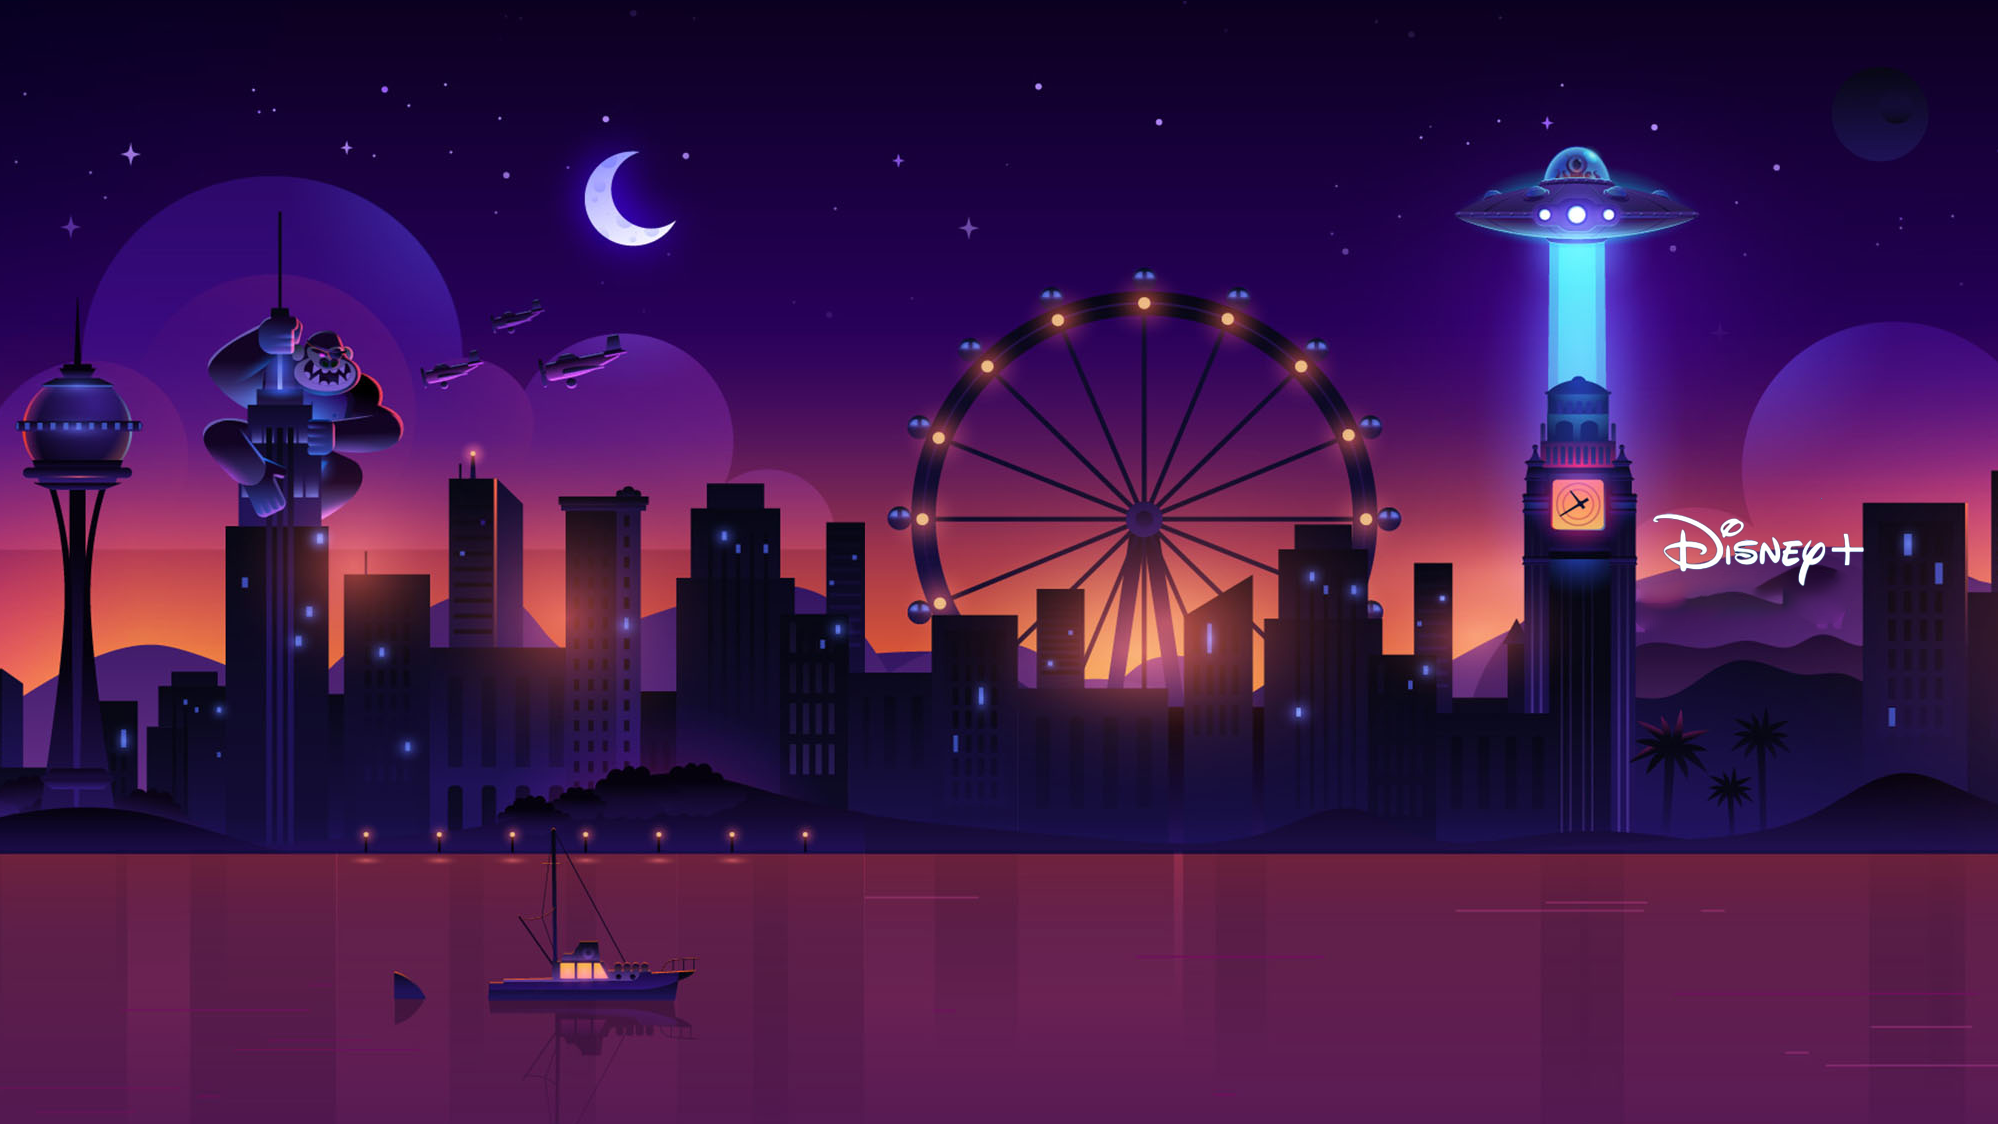 An illustration of a city with a large ferris wheel, clock tower, and mountain with Disney Plus logo